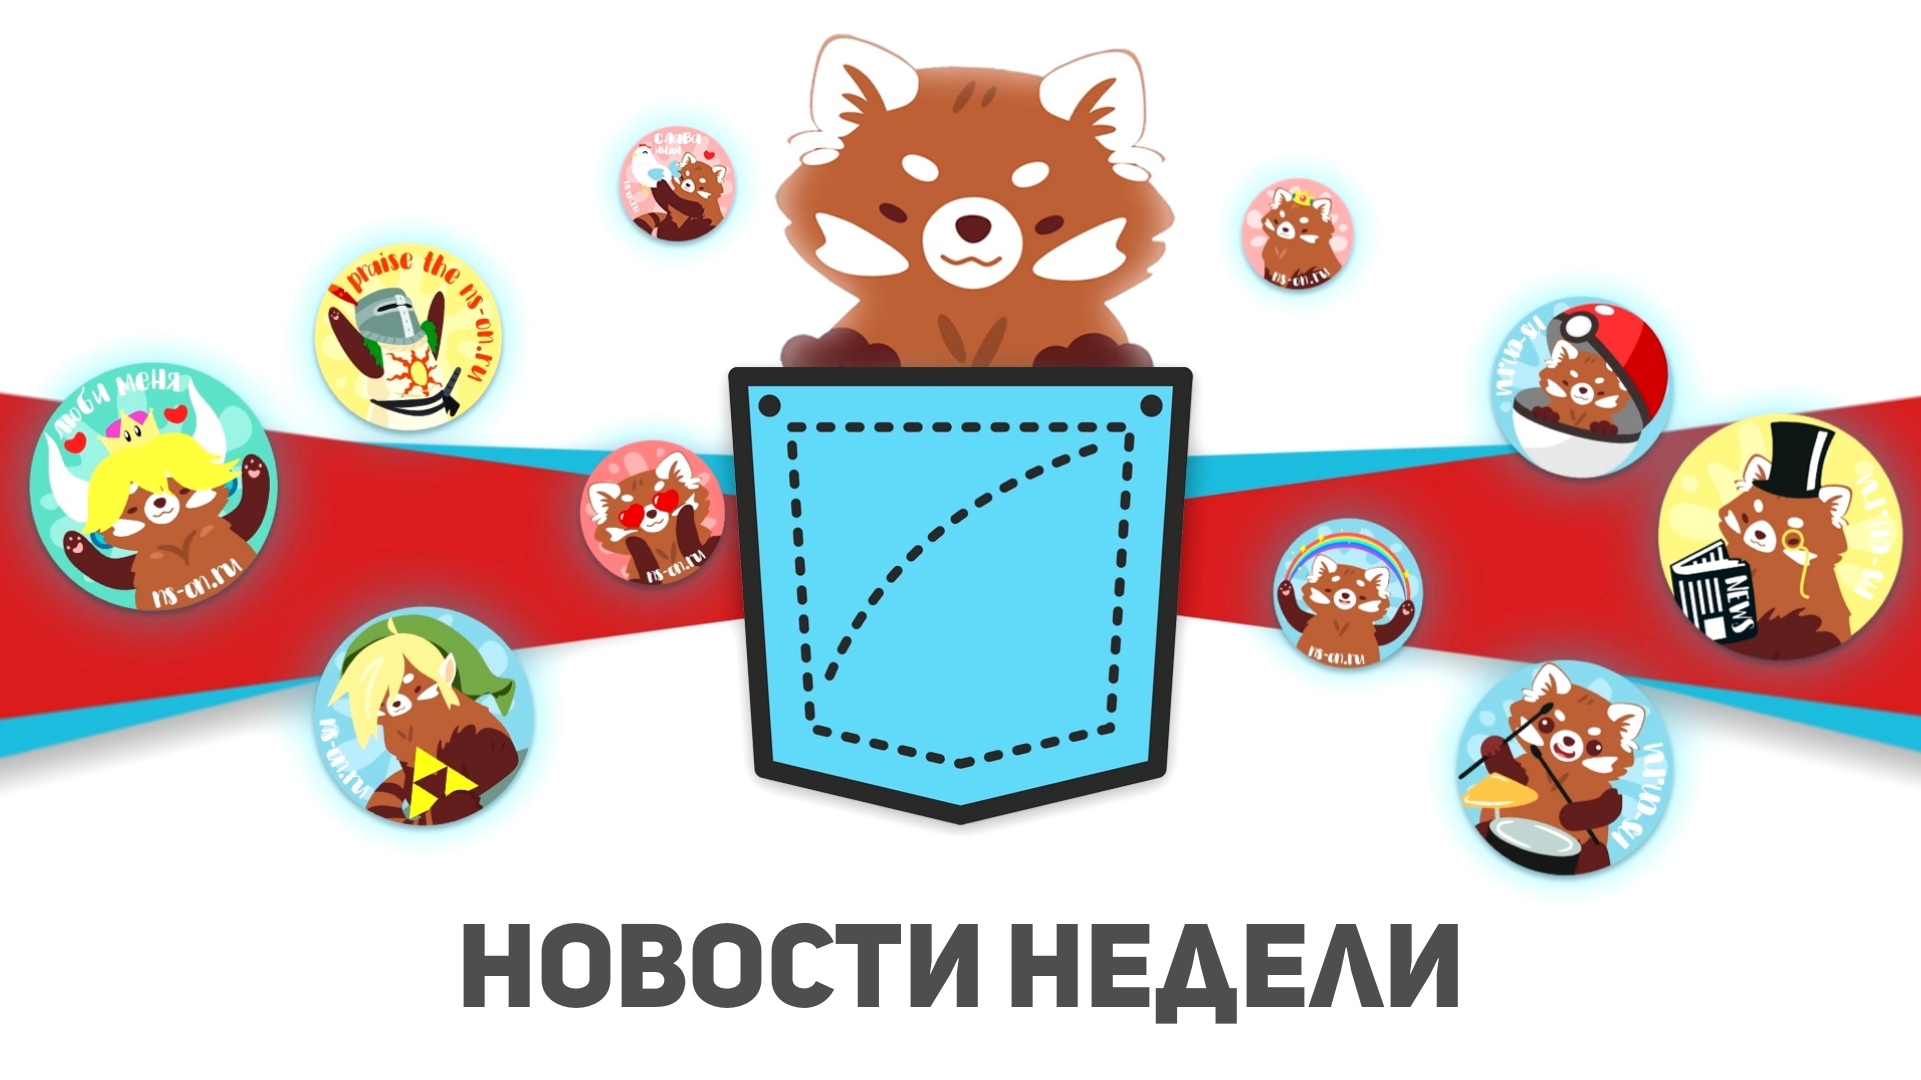 You are currently viewing Новости недели Nintendo Switch (06.12 – 12.12)